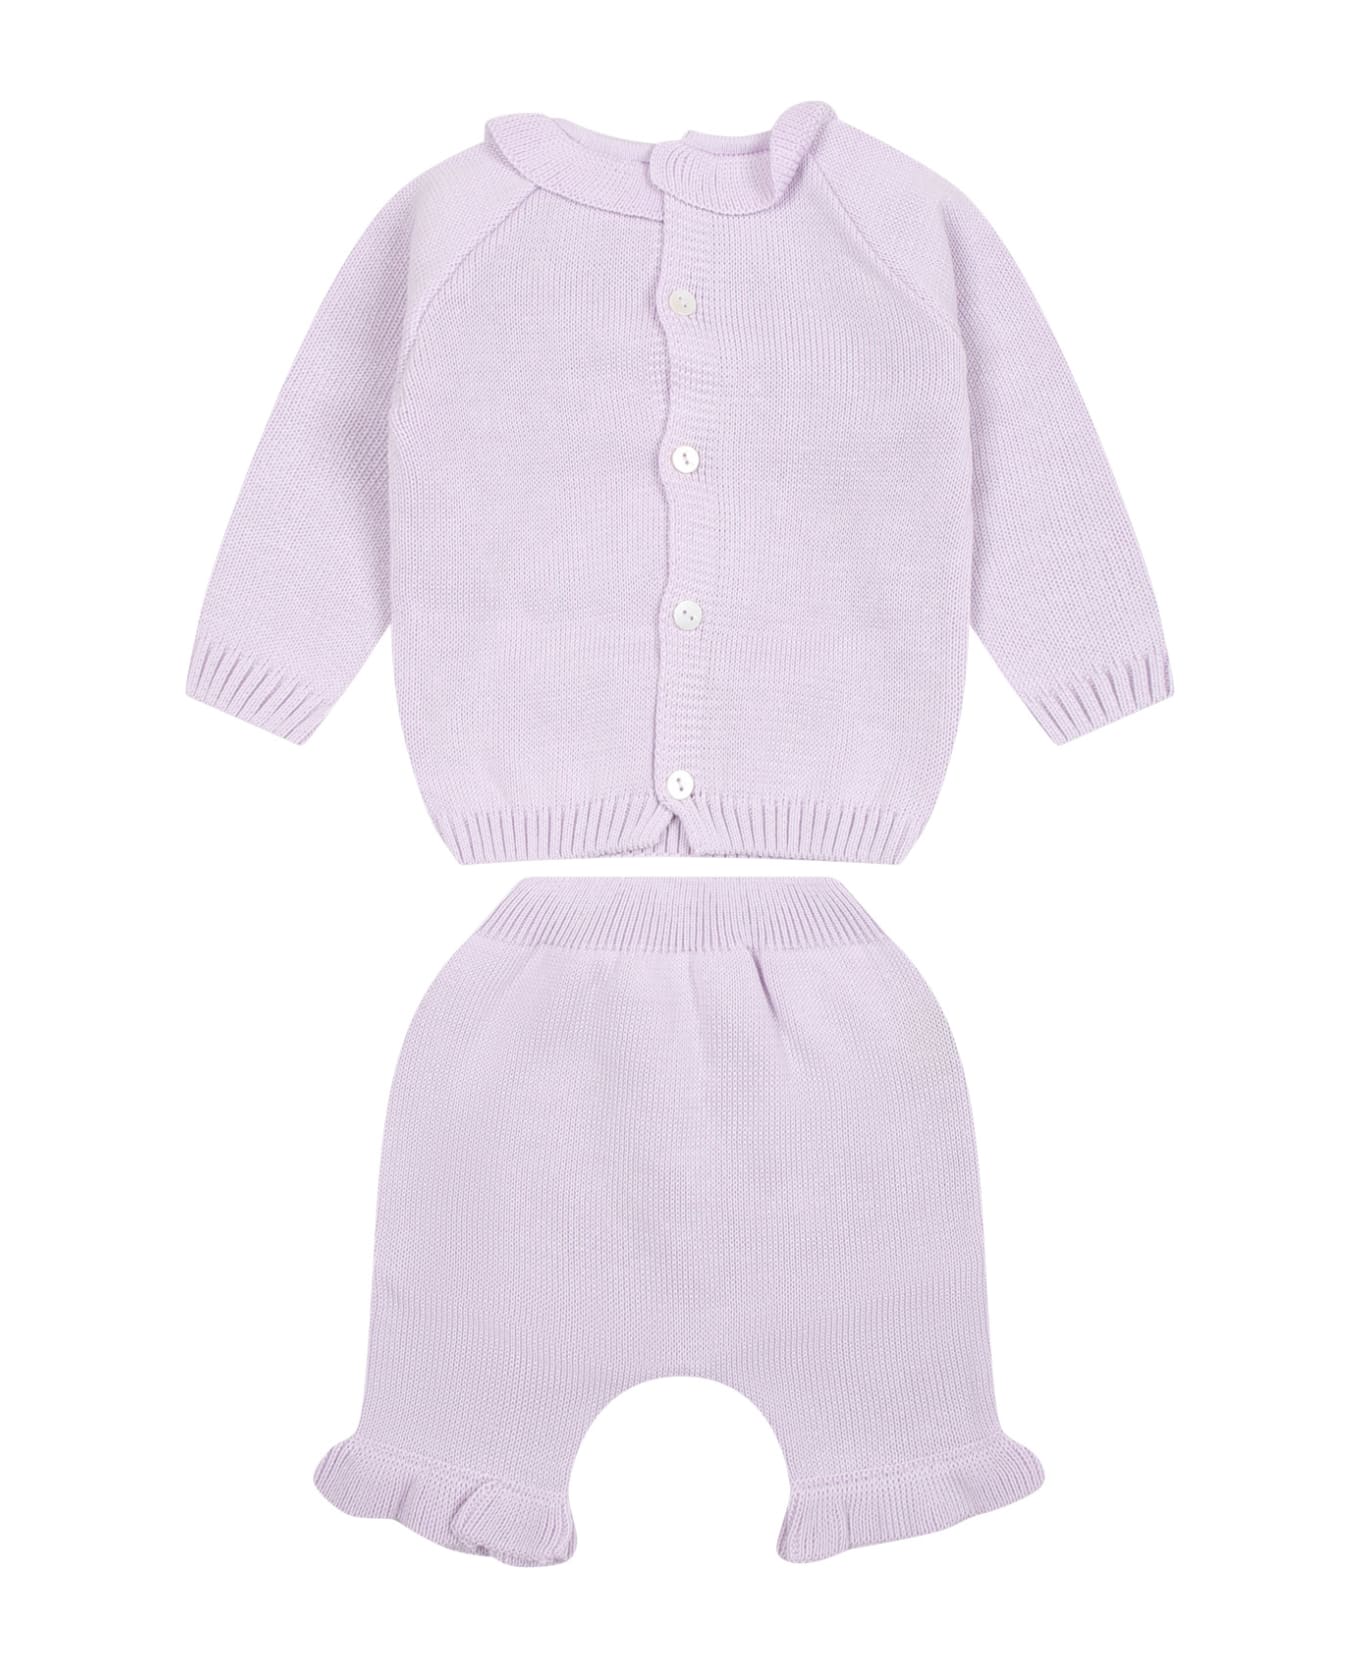 Little Bear Wisteria Birth Suit For Baby Girl - Violet